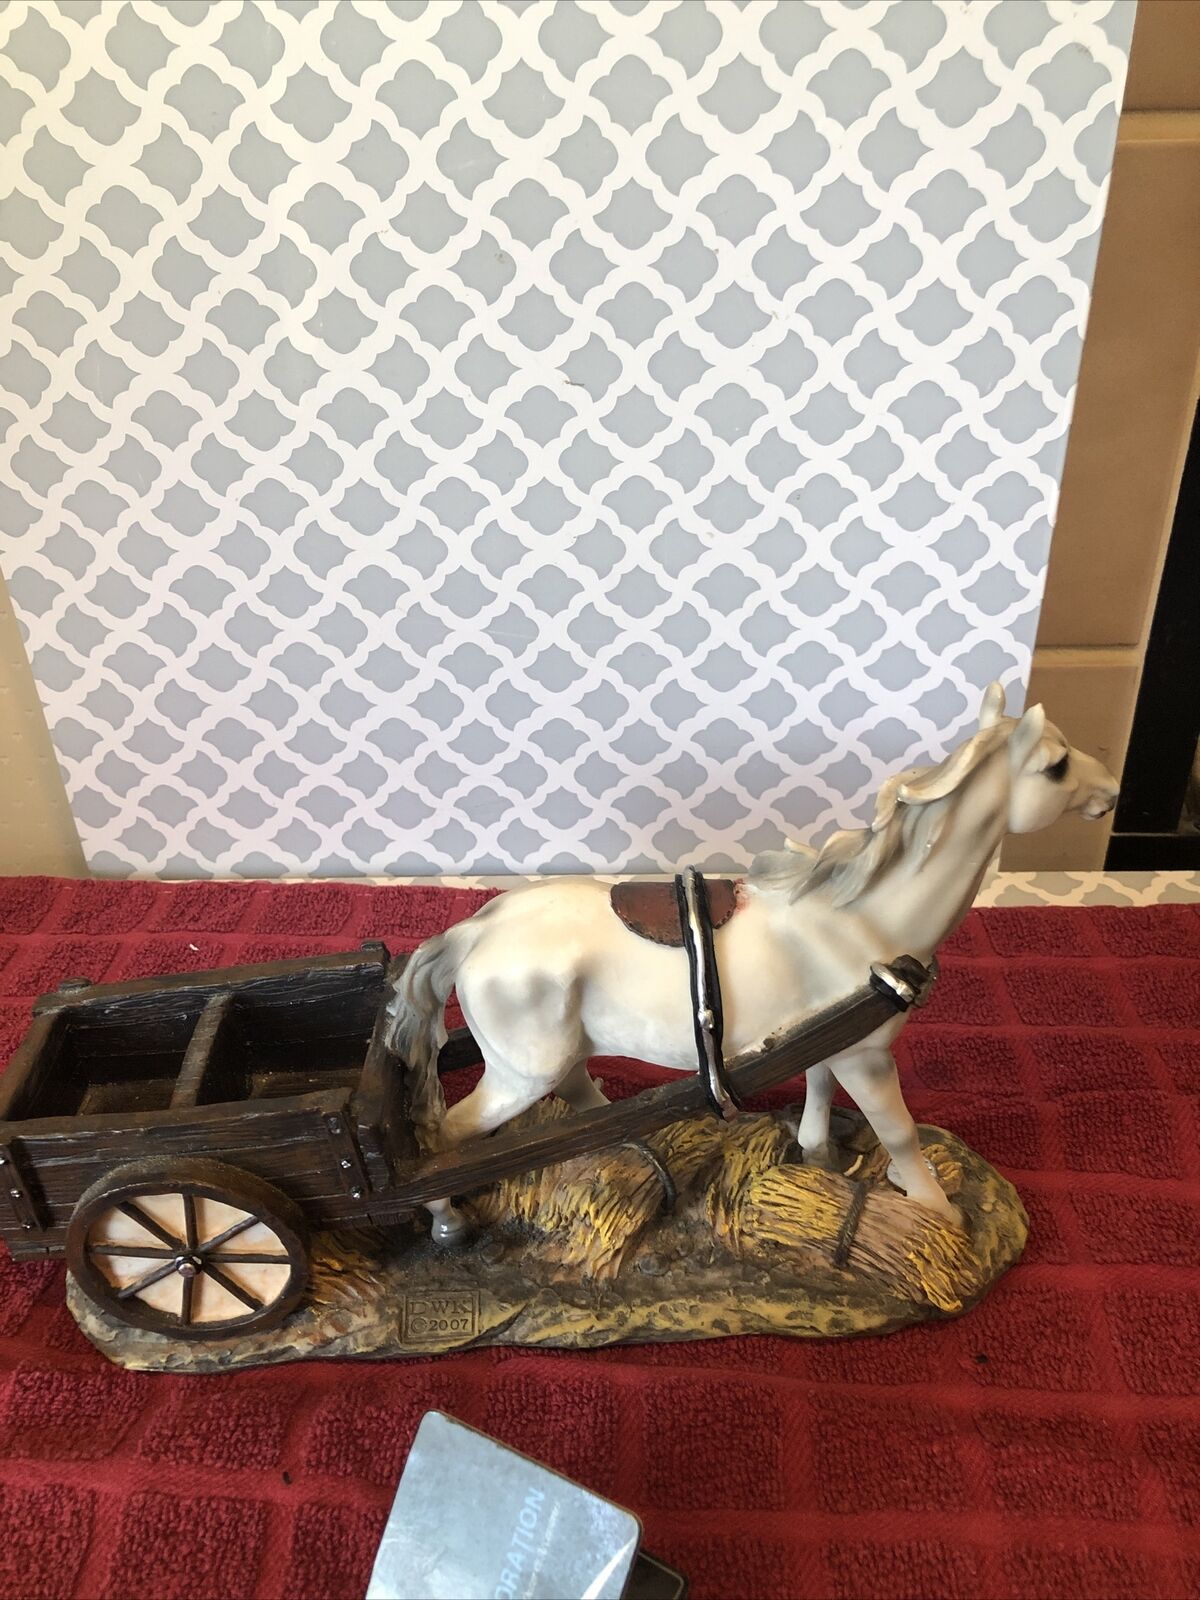 2007 DWK Limited Edition  Hand Painted Poly Resin  Horse & Cart Figurine